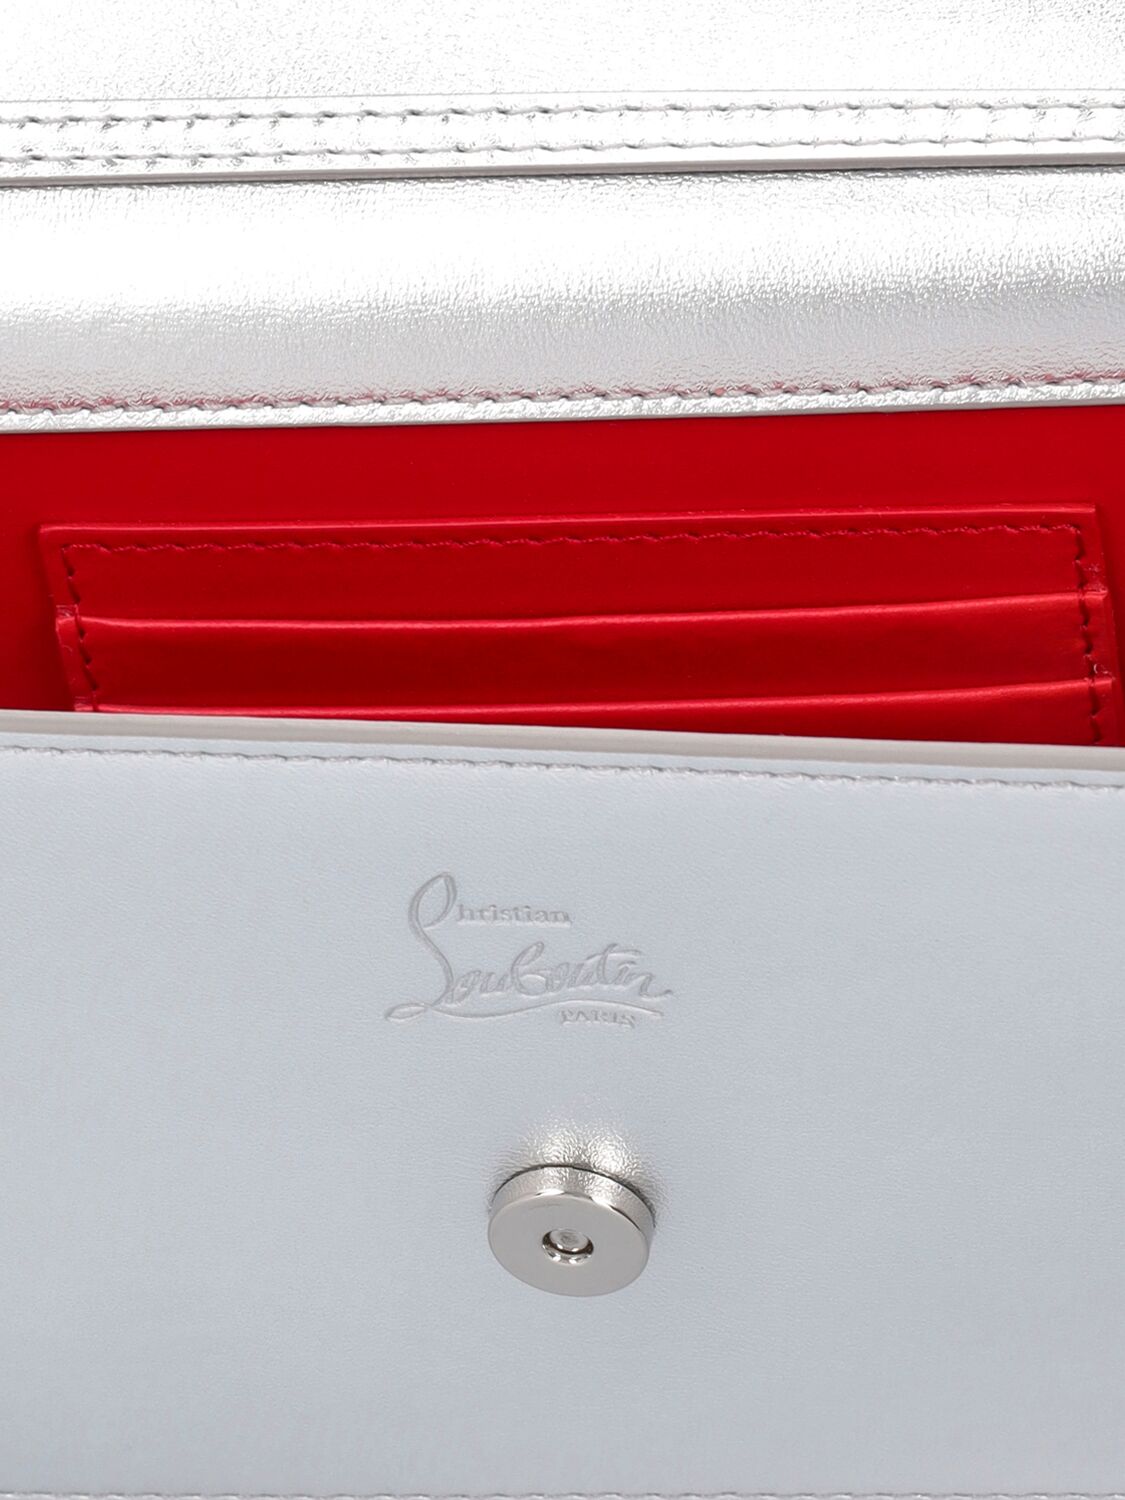 Shop Christian Louboutin Loubi54 Laminated Leather Clutch In Silver